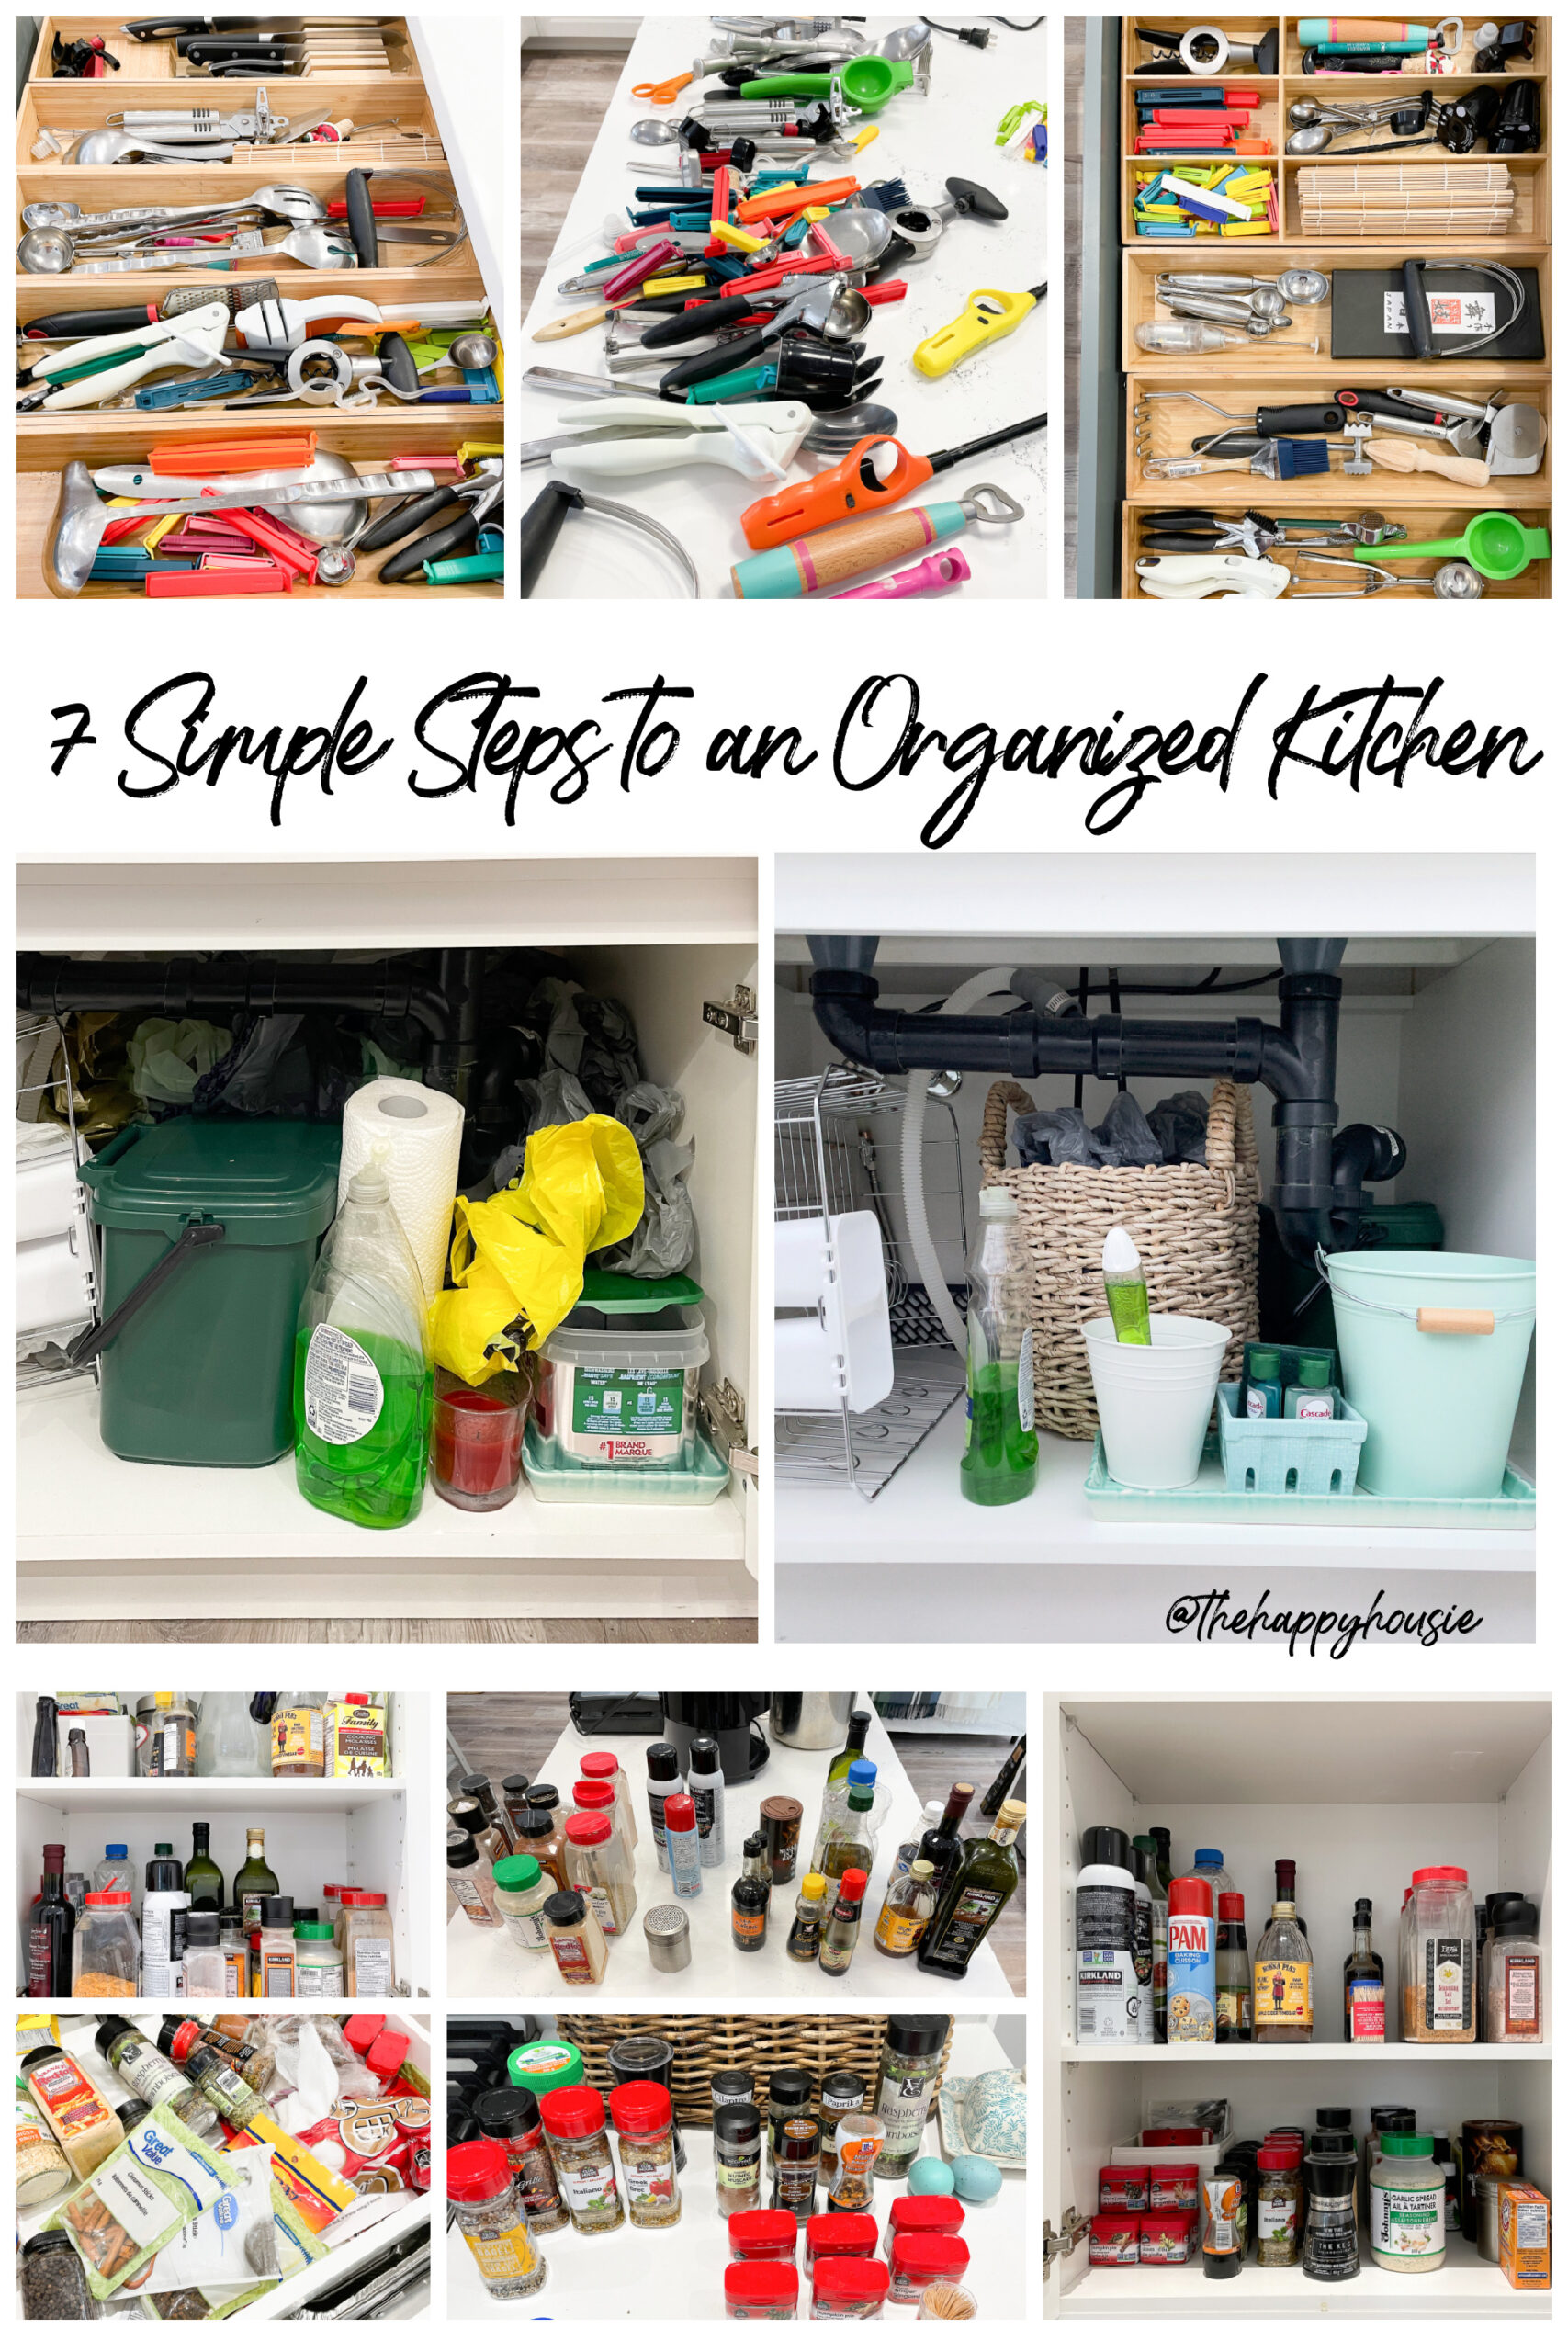 7 Steps To An Organized Kitchen graphic.